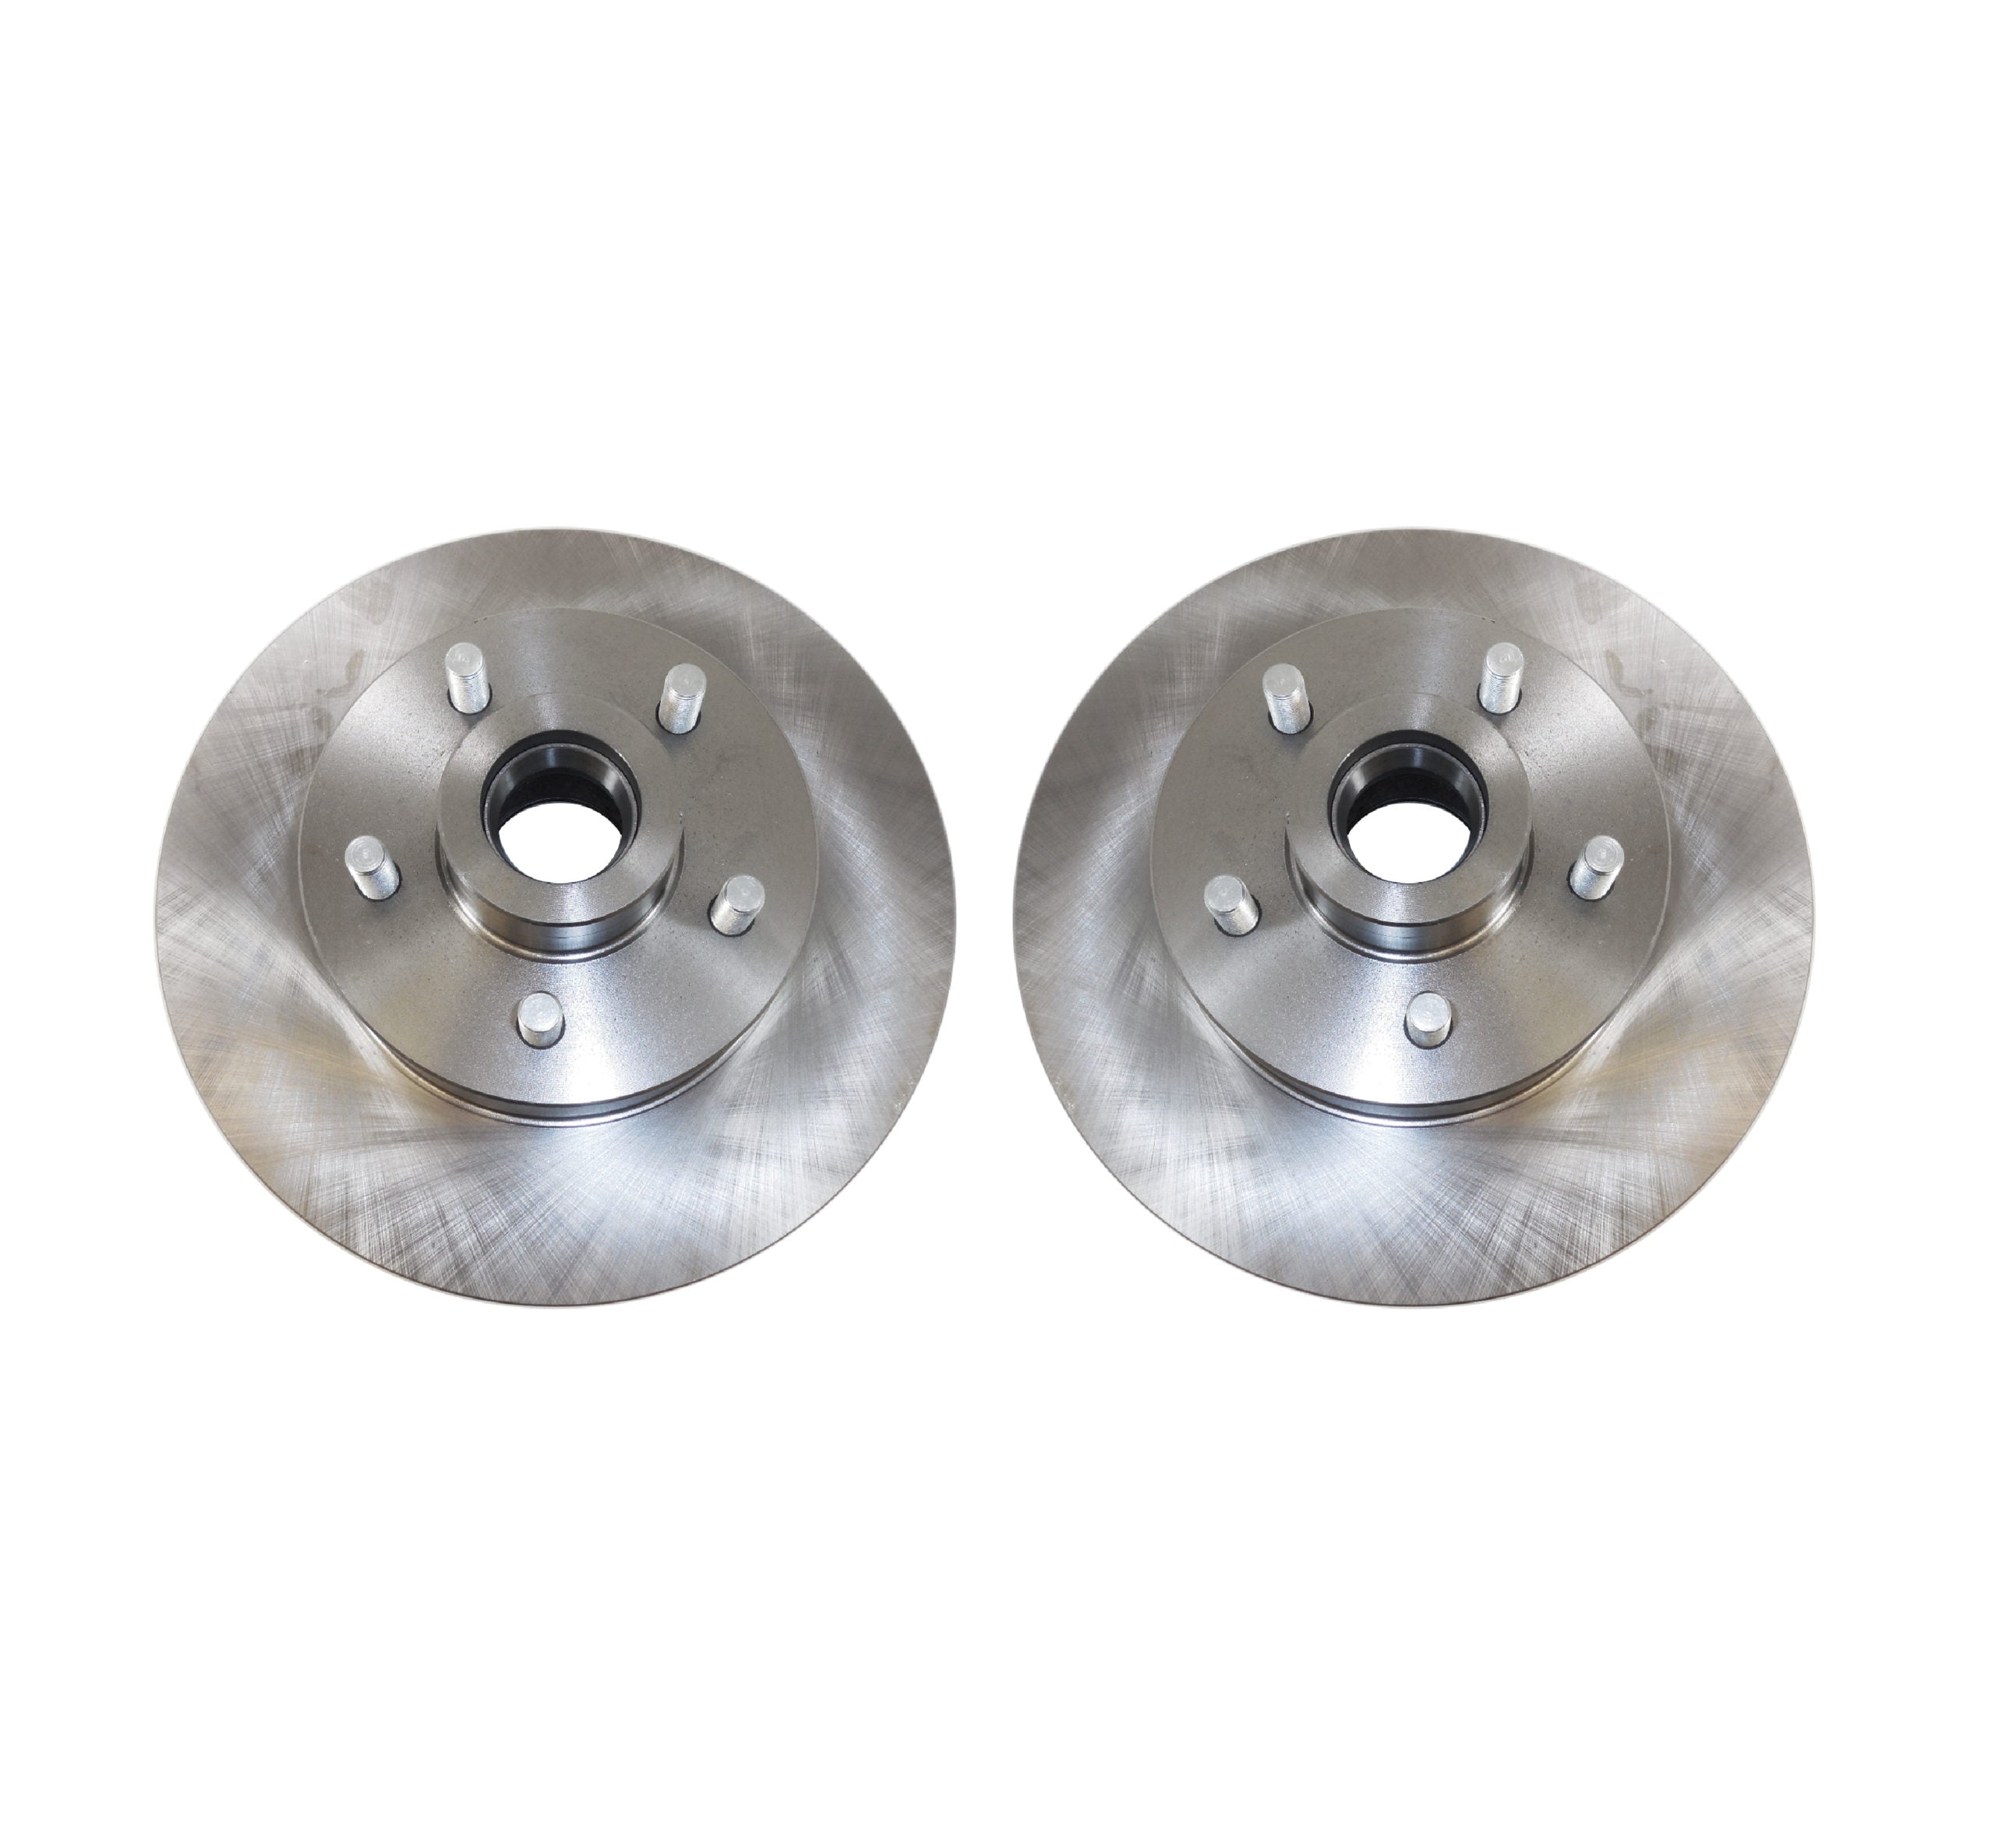 Racing Power Company R1713 11 inch rotor 1 inch thick 5x4.50 bolt pattern